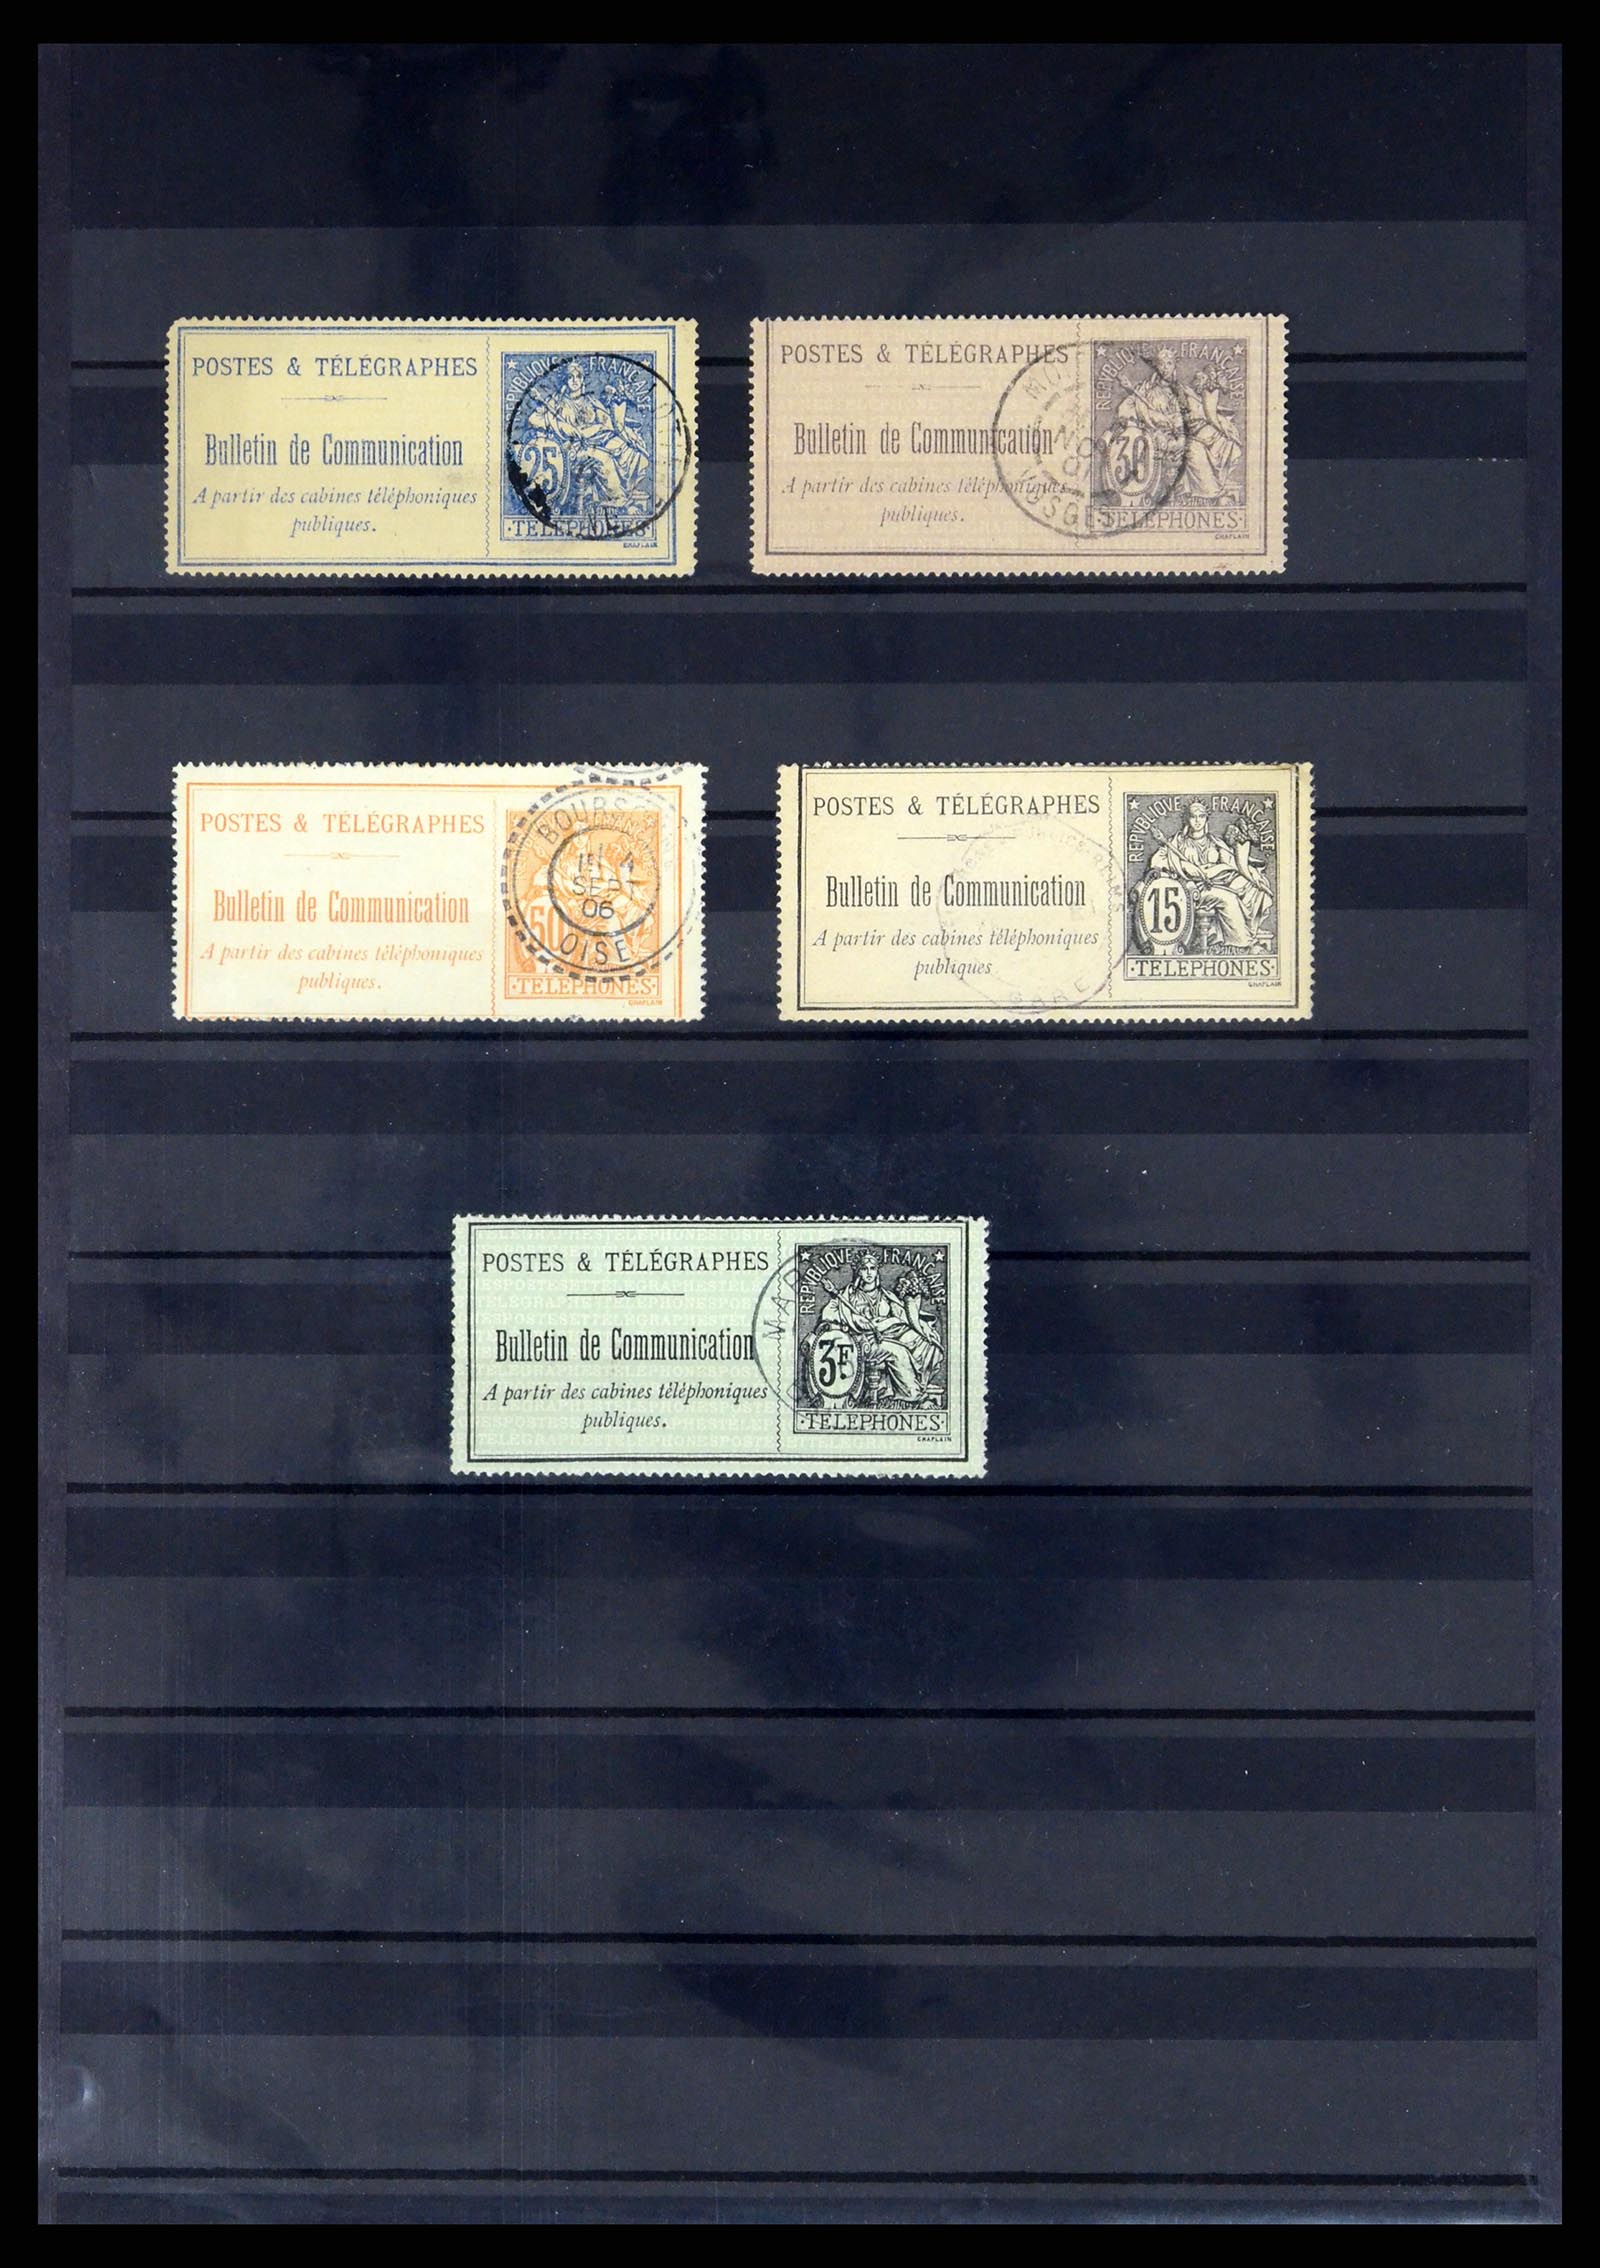 37492 020 - Stamp collection 37492 France back of the book and postal items 1853-202